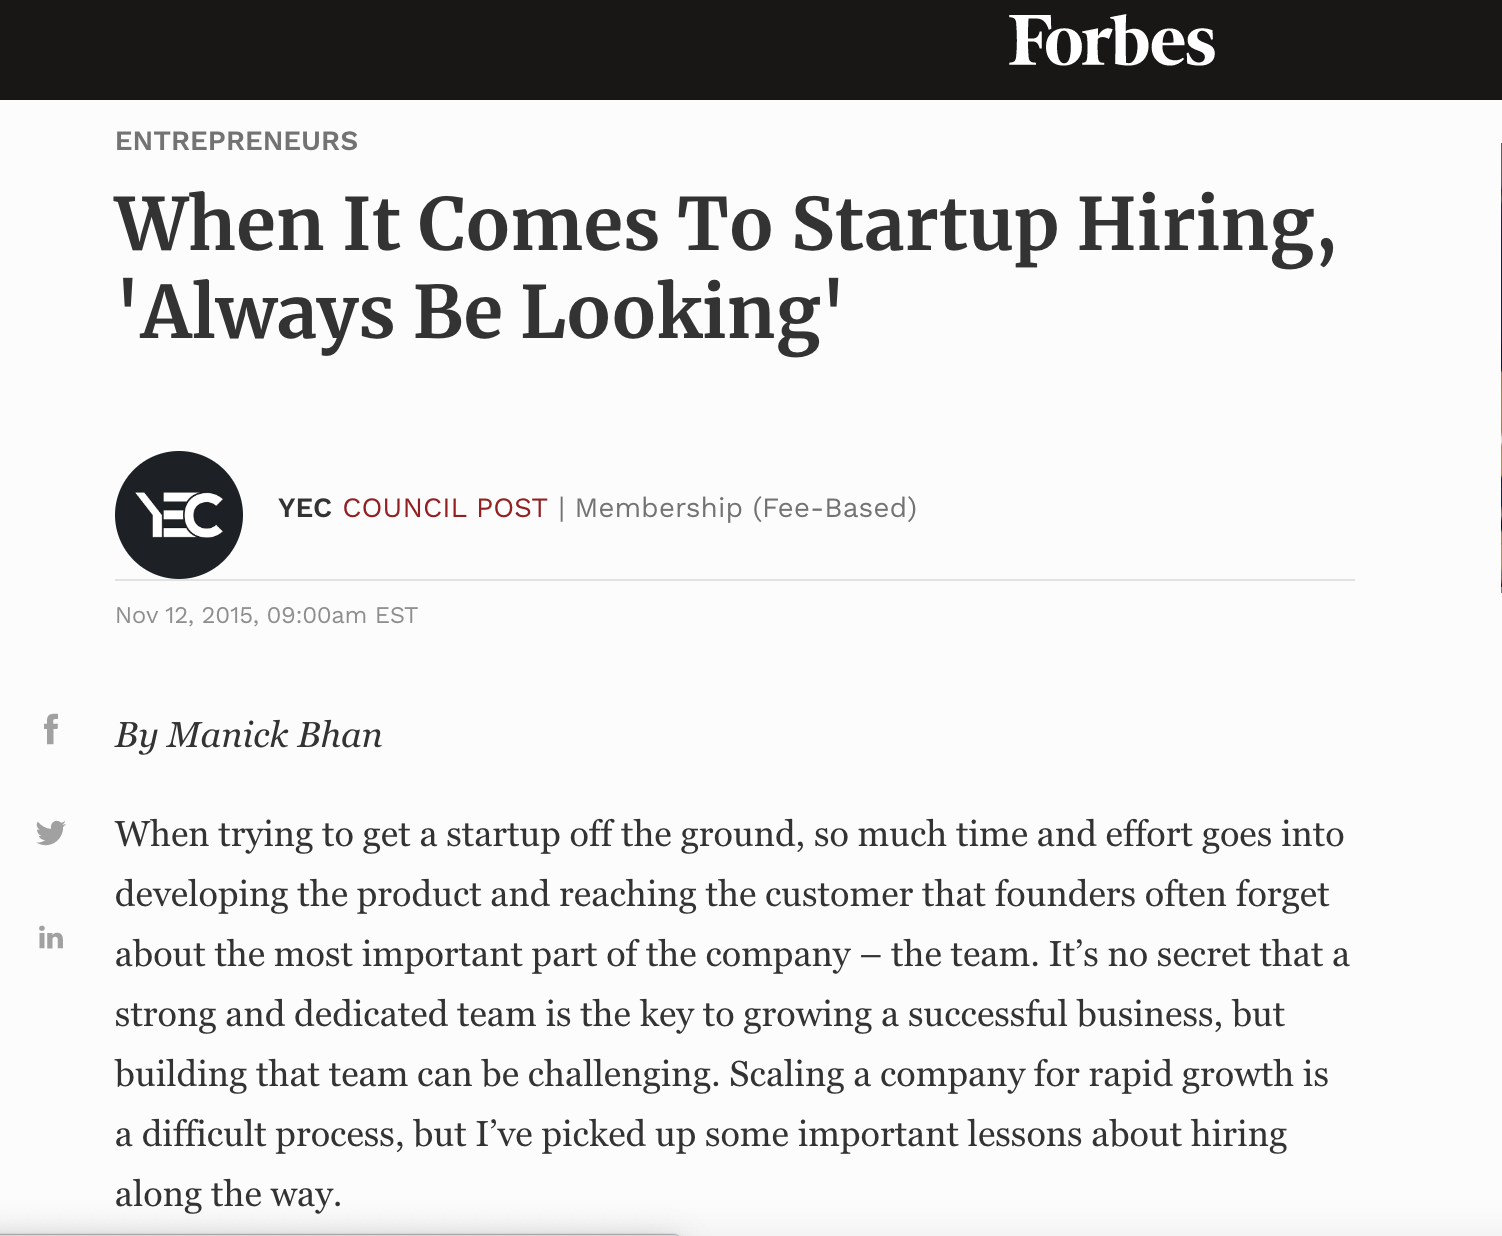 Forbes thought leadership article